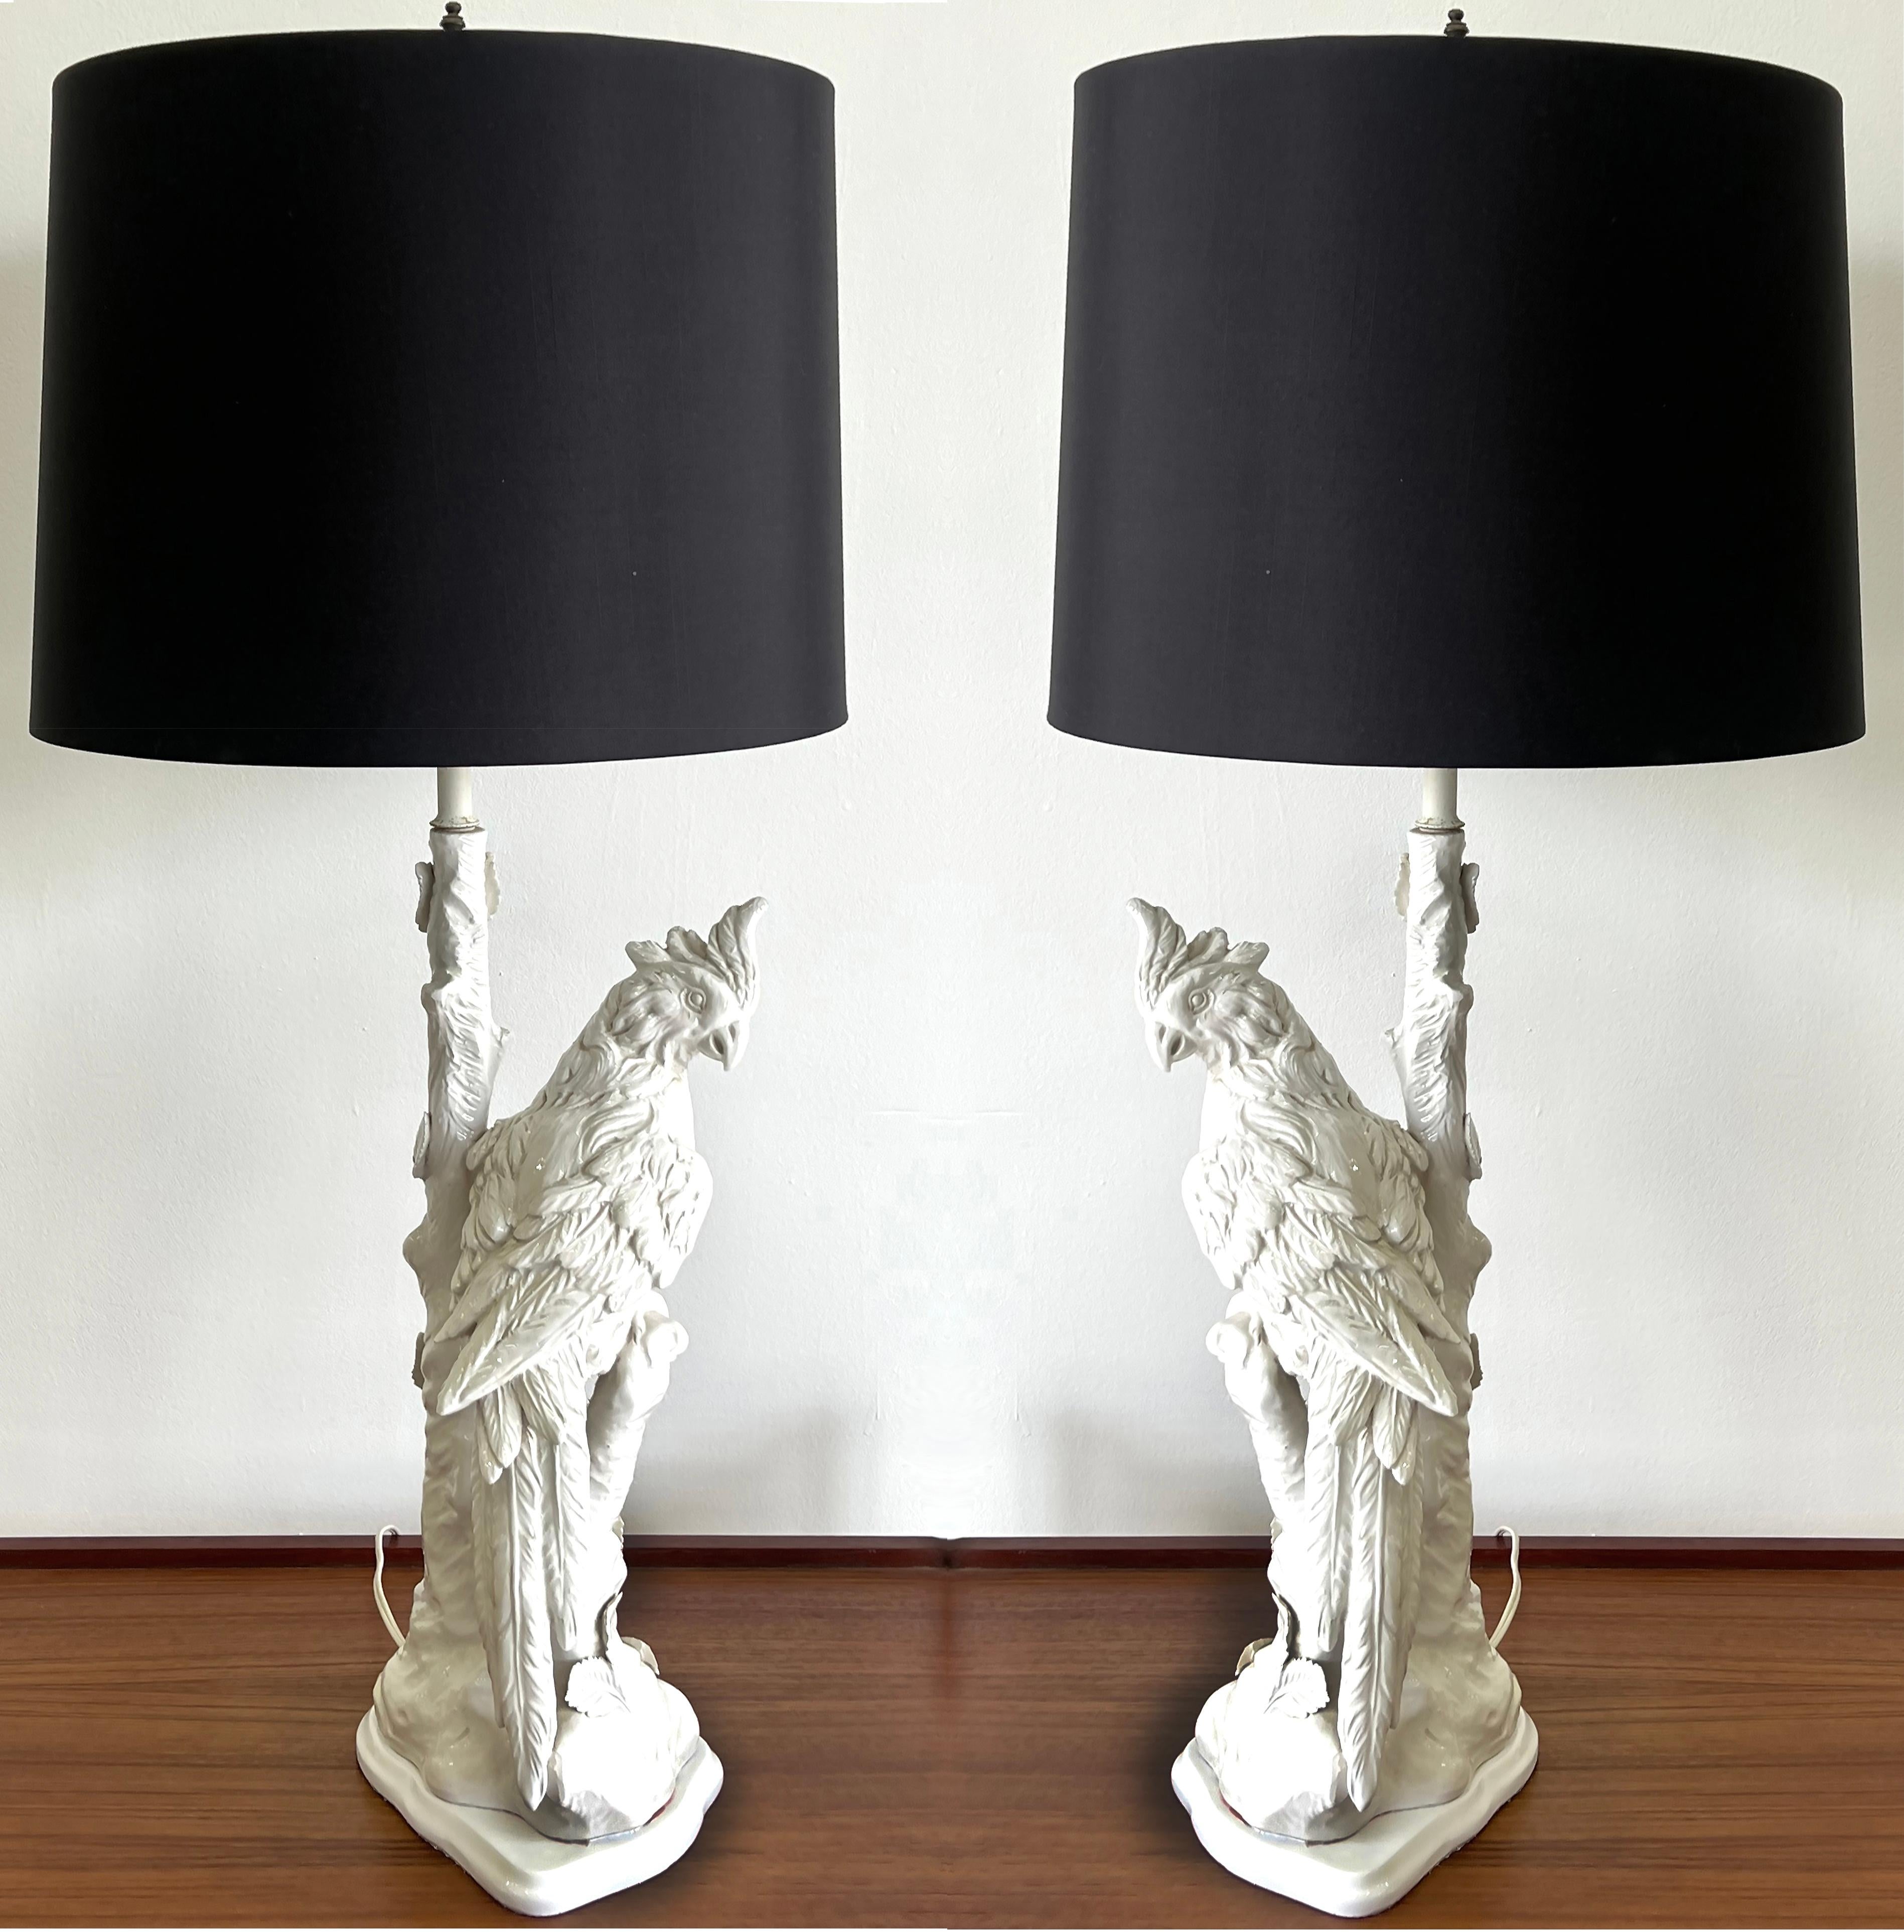 Offered for sale is a pair of vintage Blanc De Chine bird motif ceramic lamps.  The lamps have a  parrot or cockatiel perched in a tree with foliage. The figures are nicely detailed The lamps are a true pair with a left-facing and a right-facing